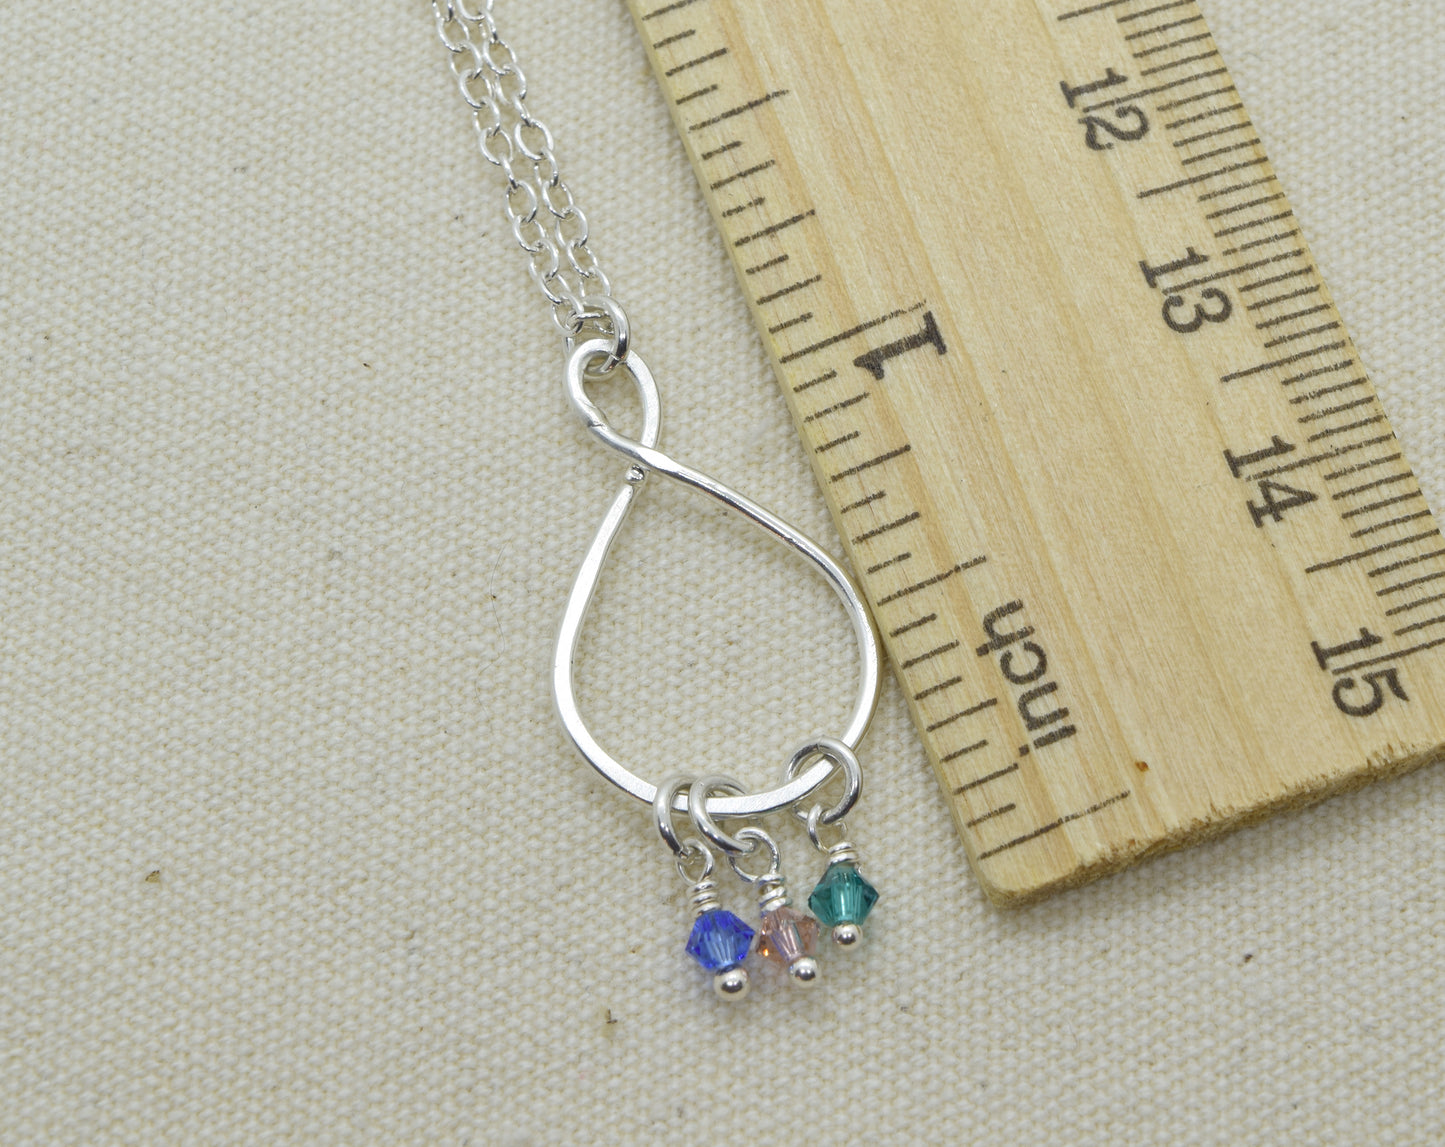 Infinity Sterling Silver Birthstone Necklace